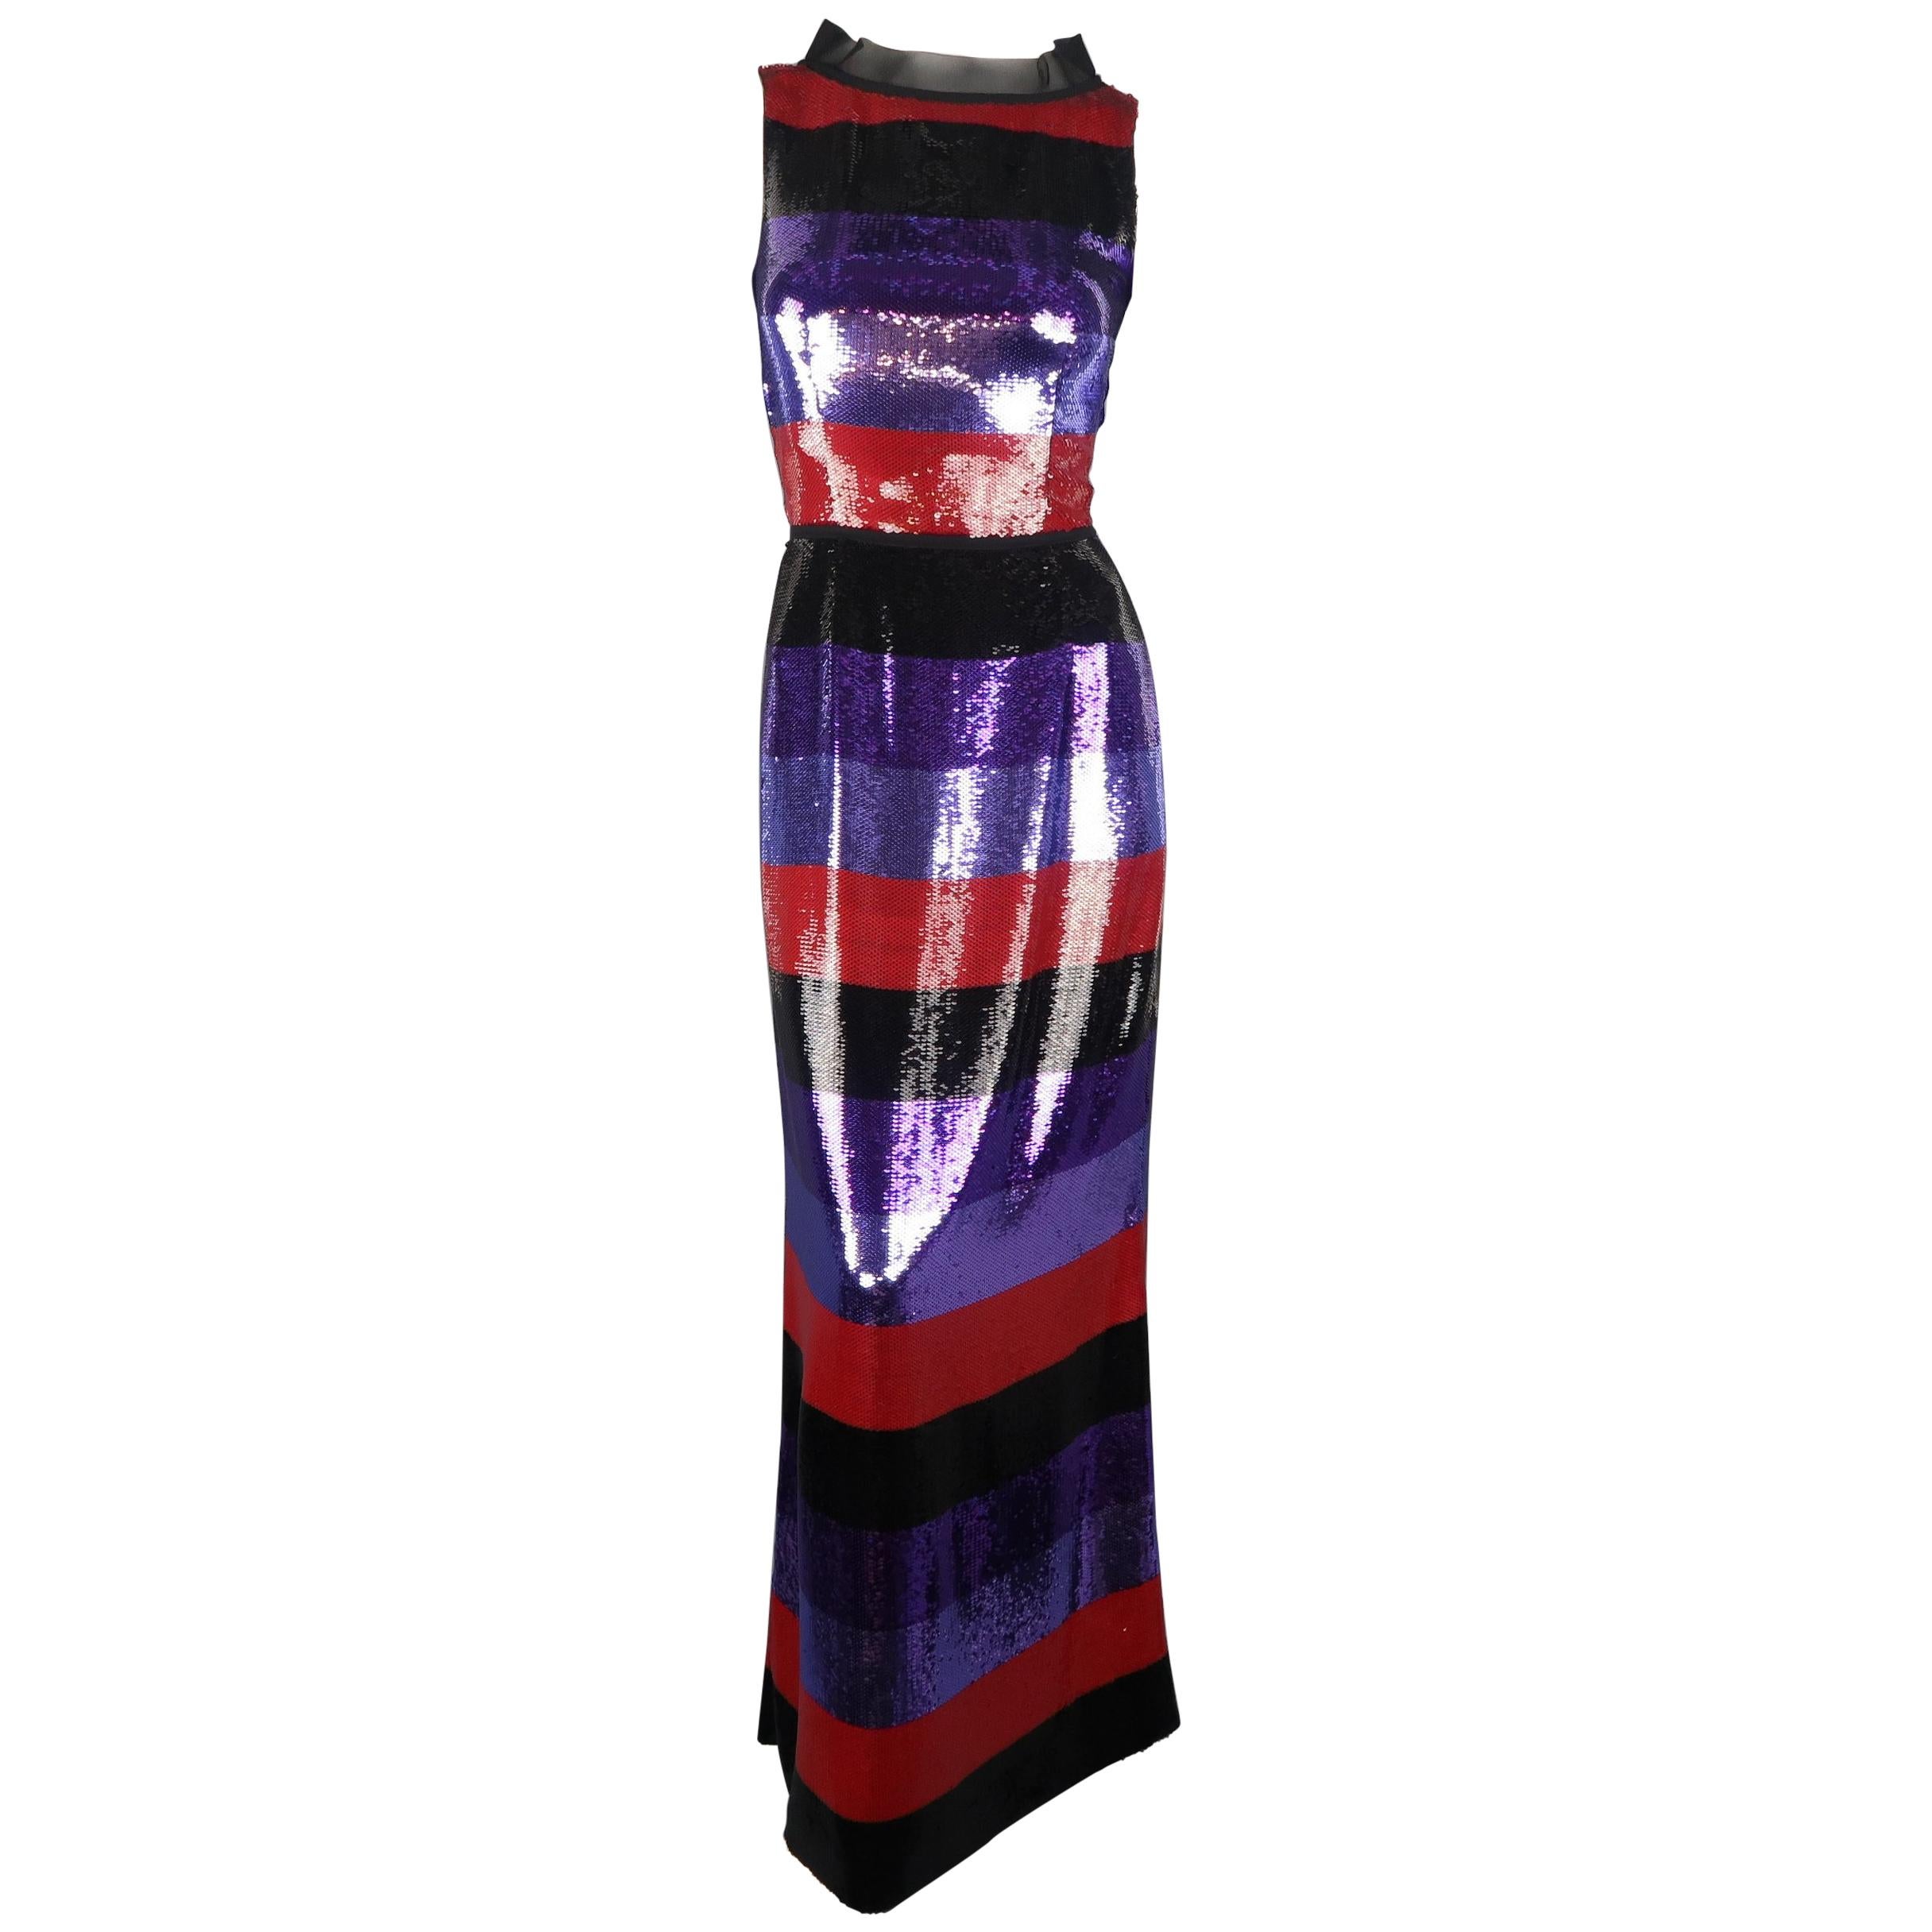 Prada Dress - Purple and Red Striped Sequin Sleeveless Column Gown